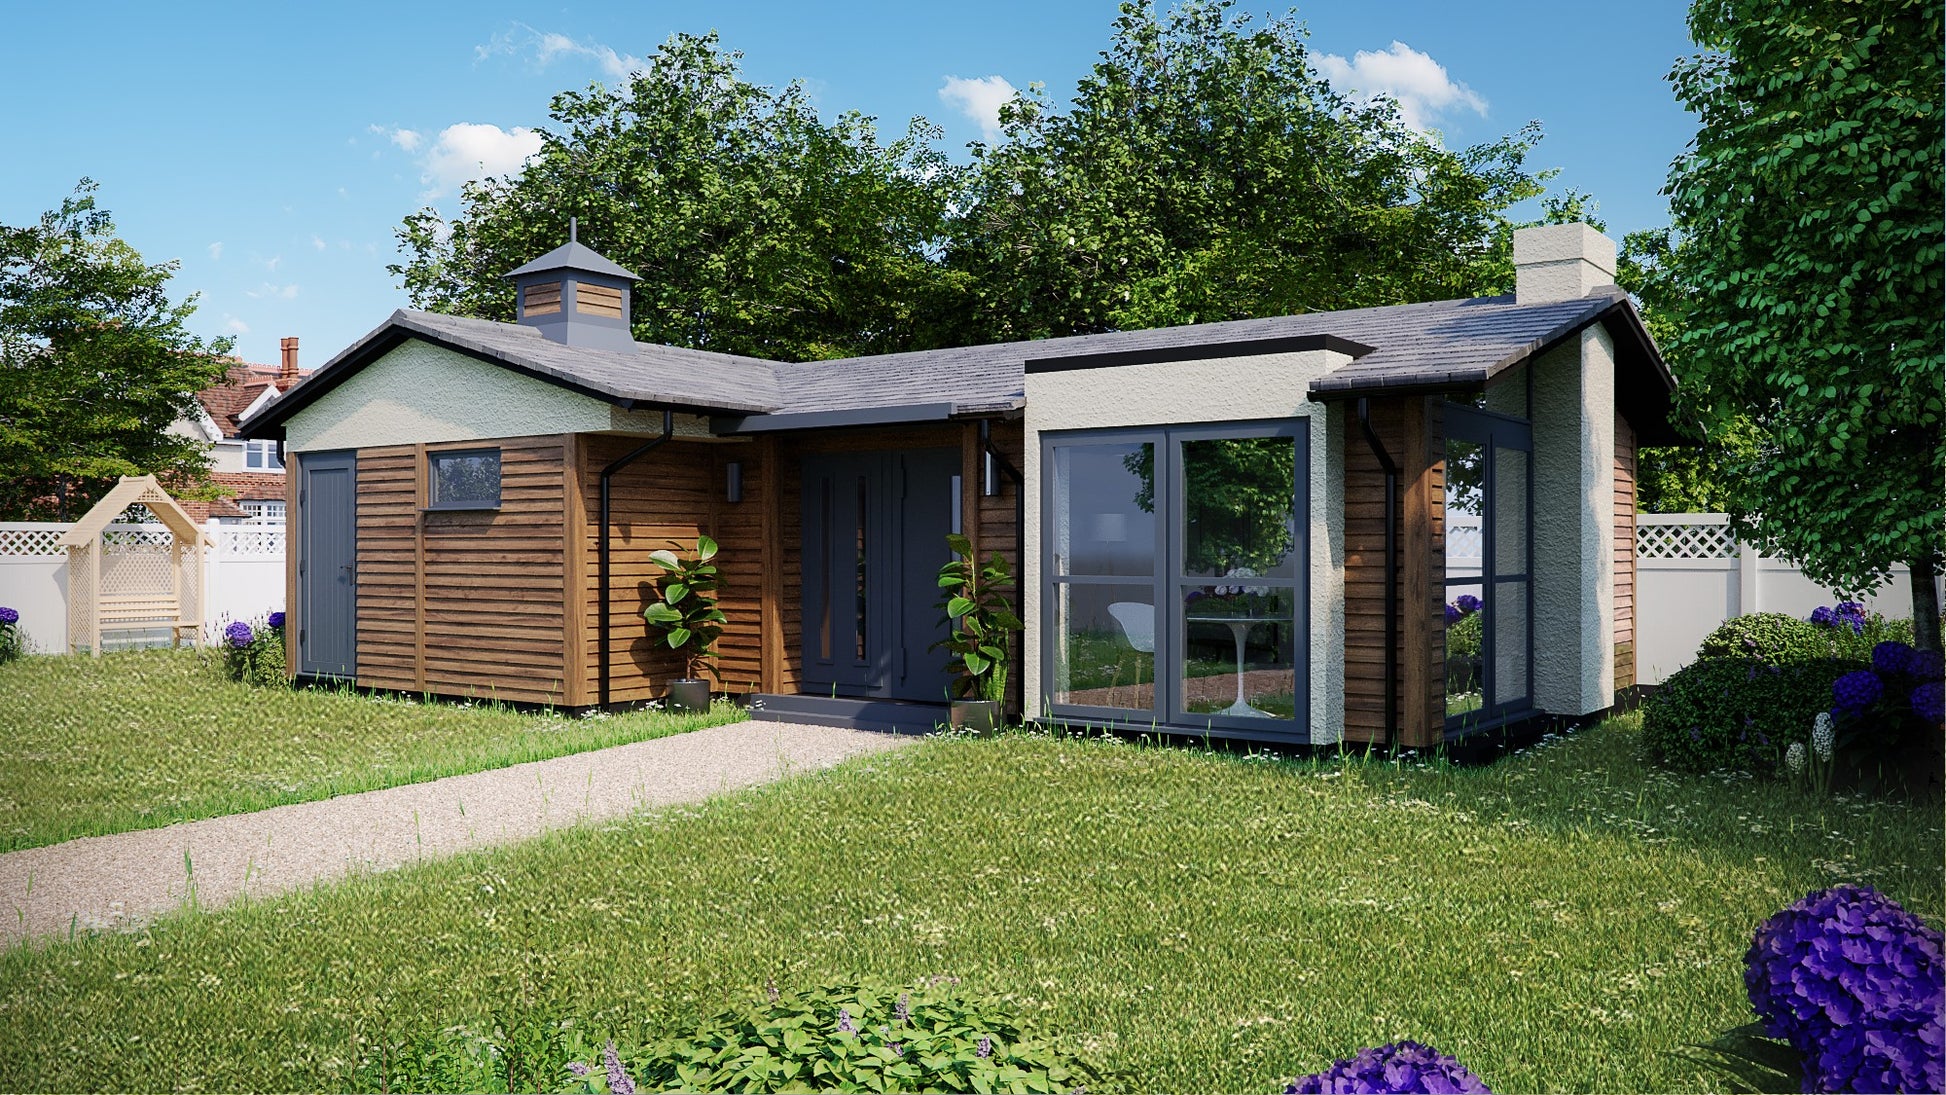 Modern Annexe Log Cabin by Rubicon Garden Rooms with large windows, situated in a sunny garden with lush grass and flowering shrubs.